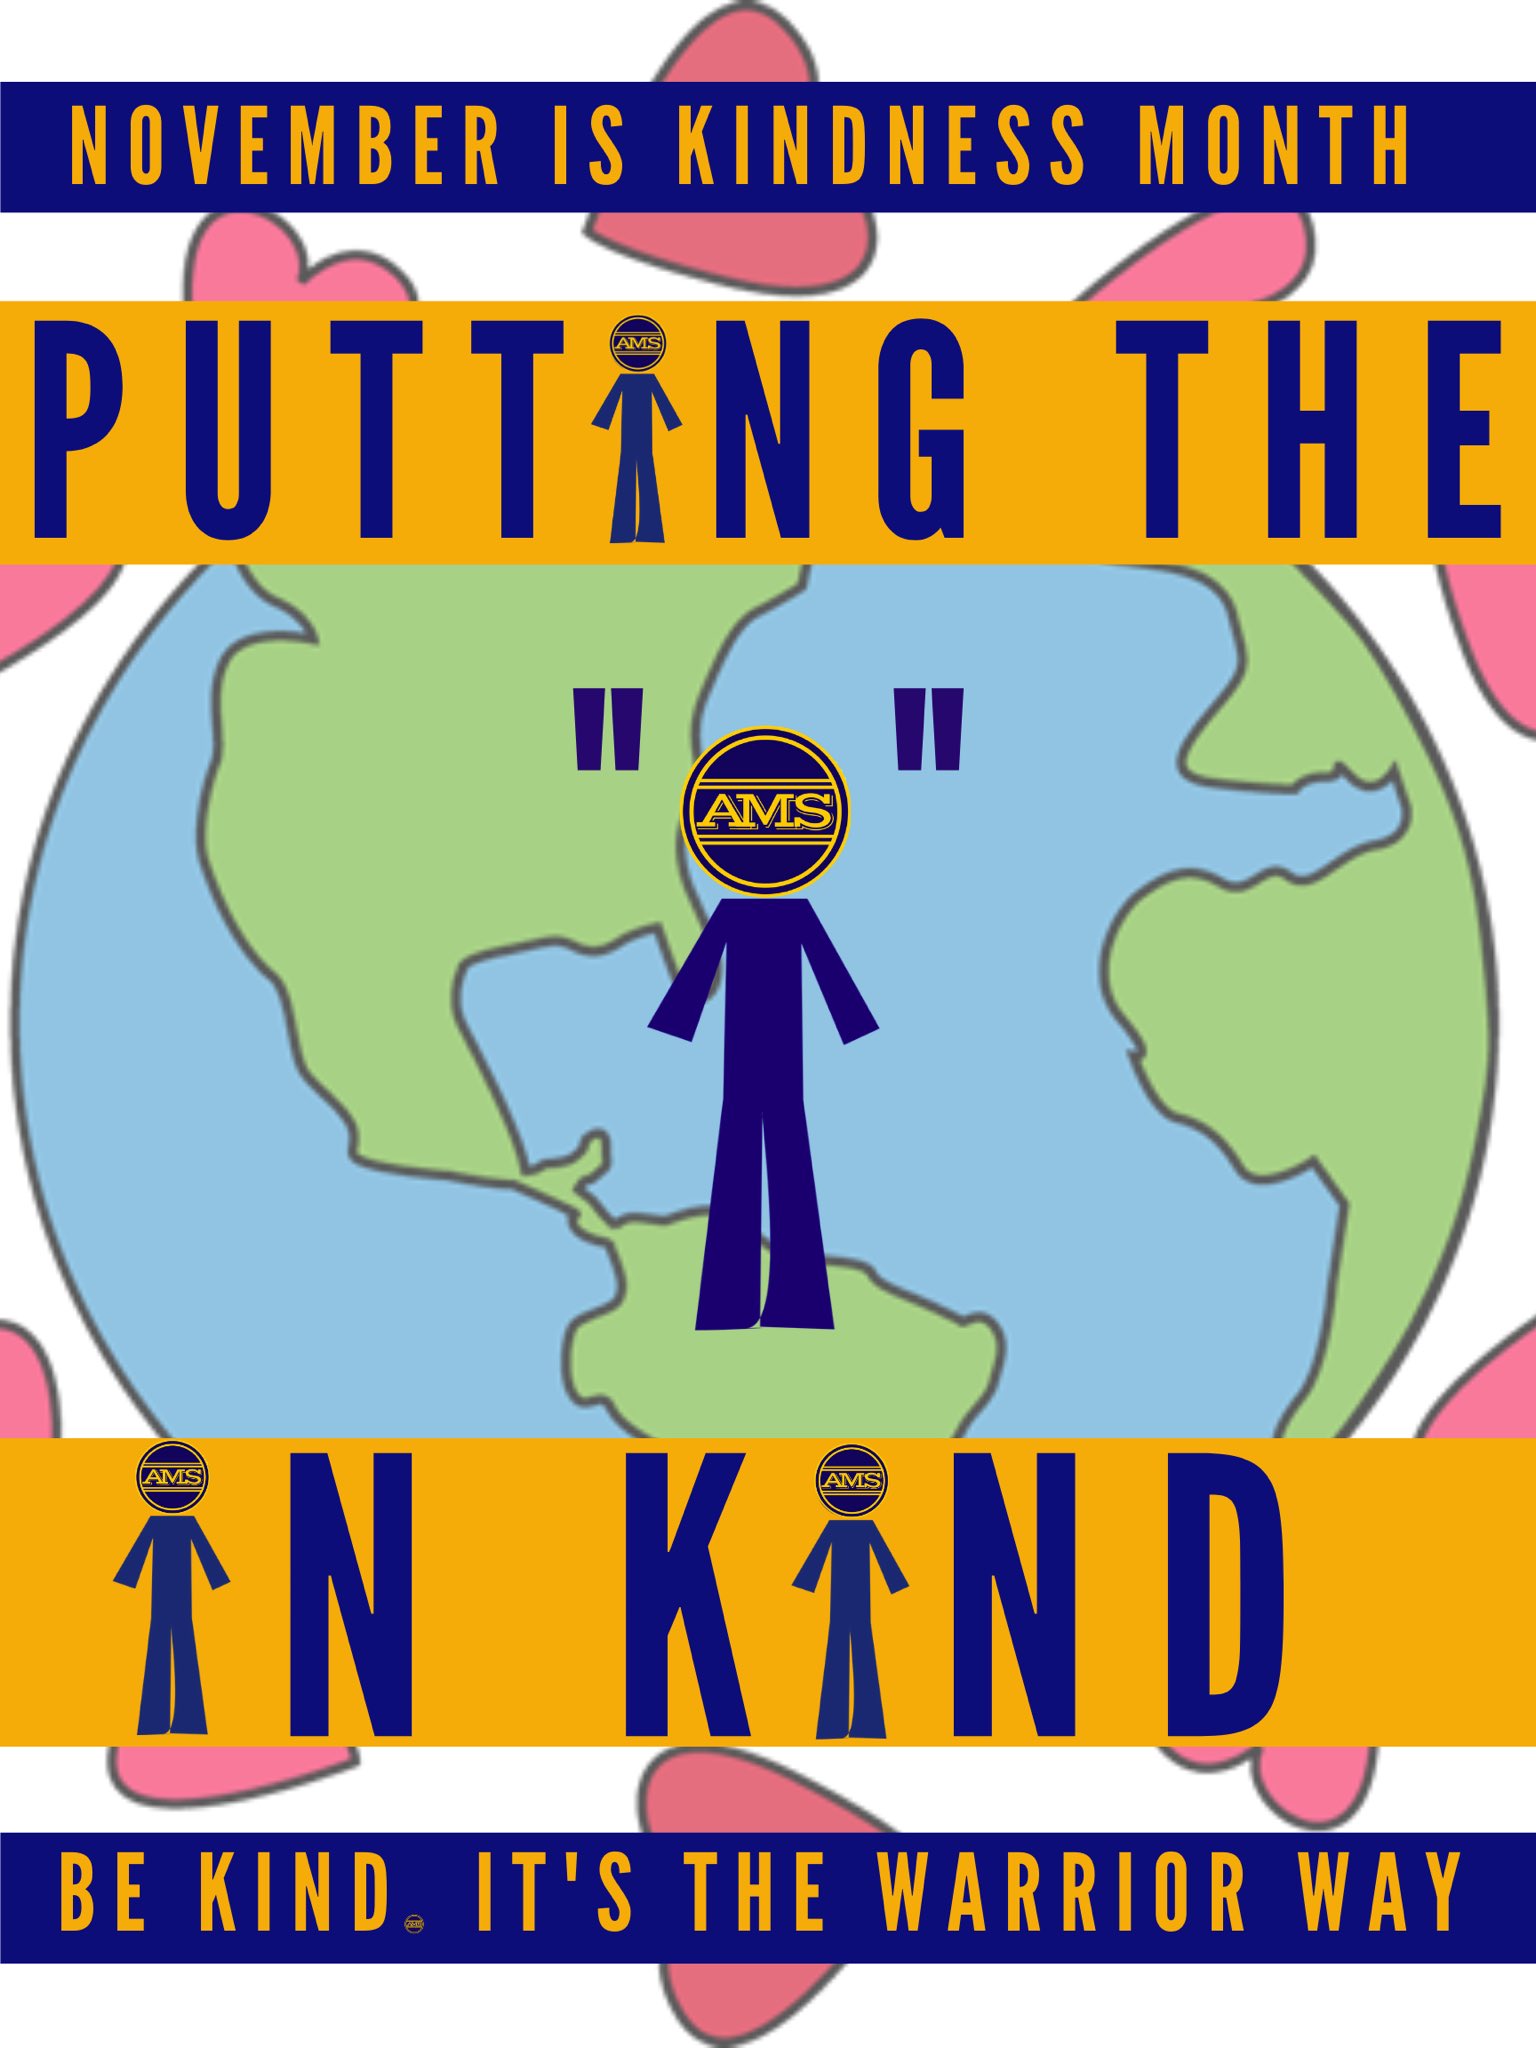 AMS Kindness graphic